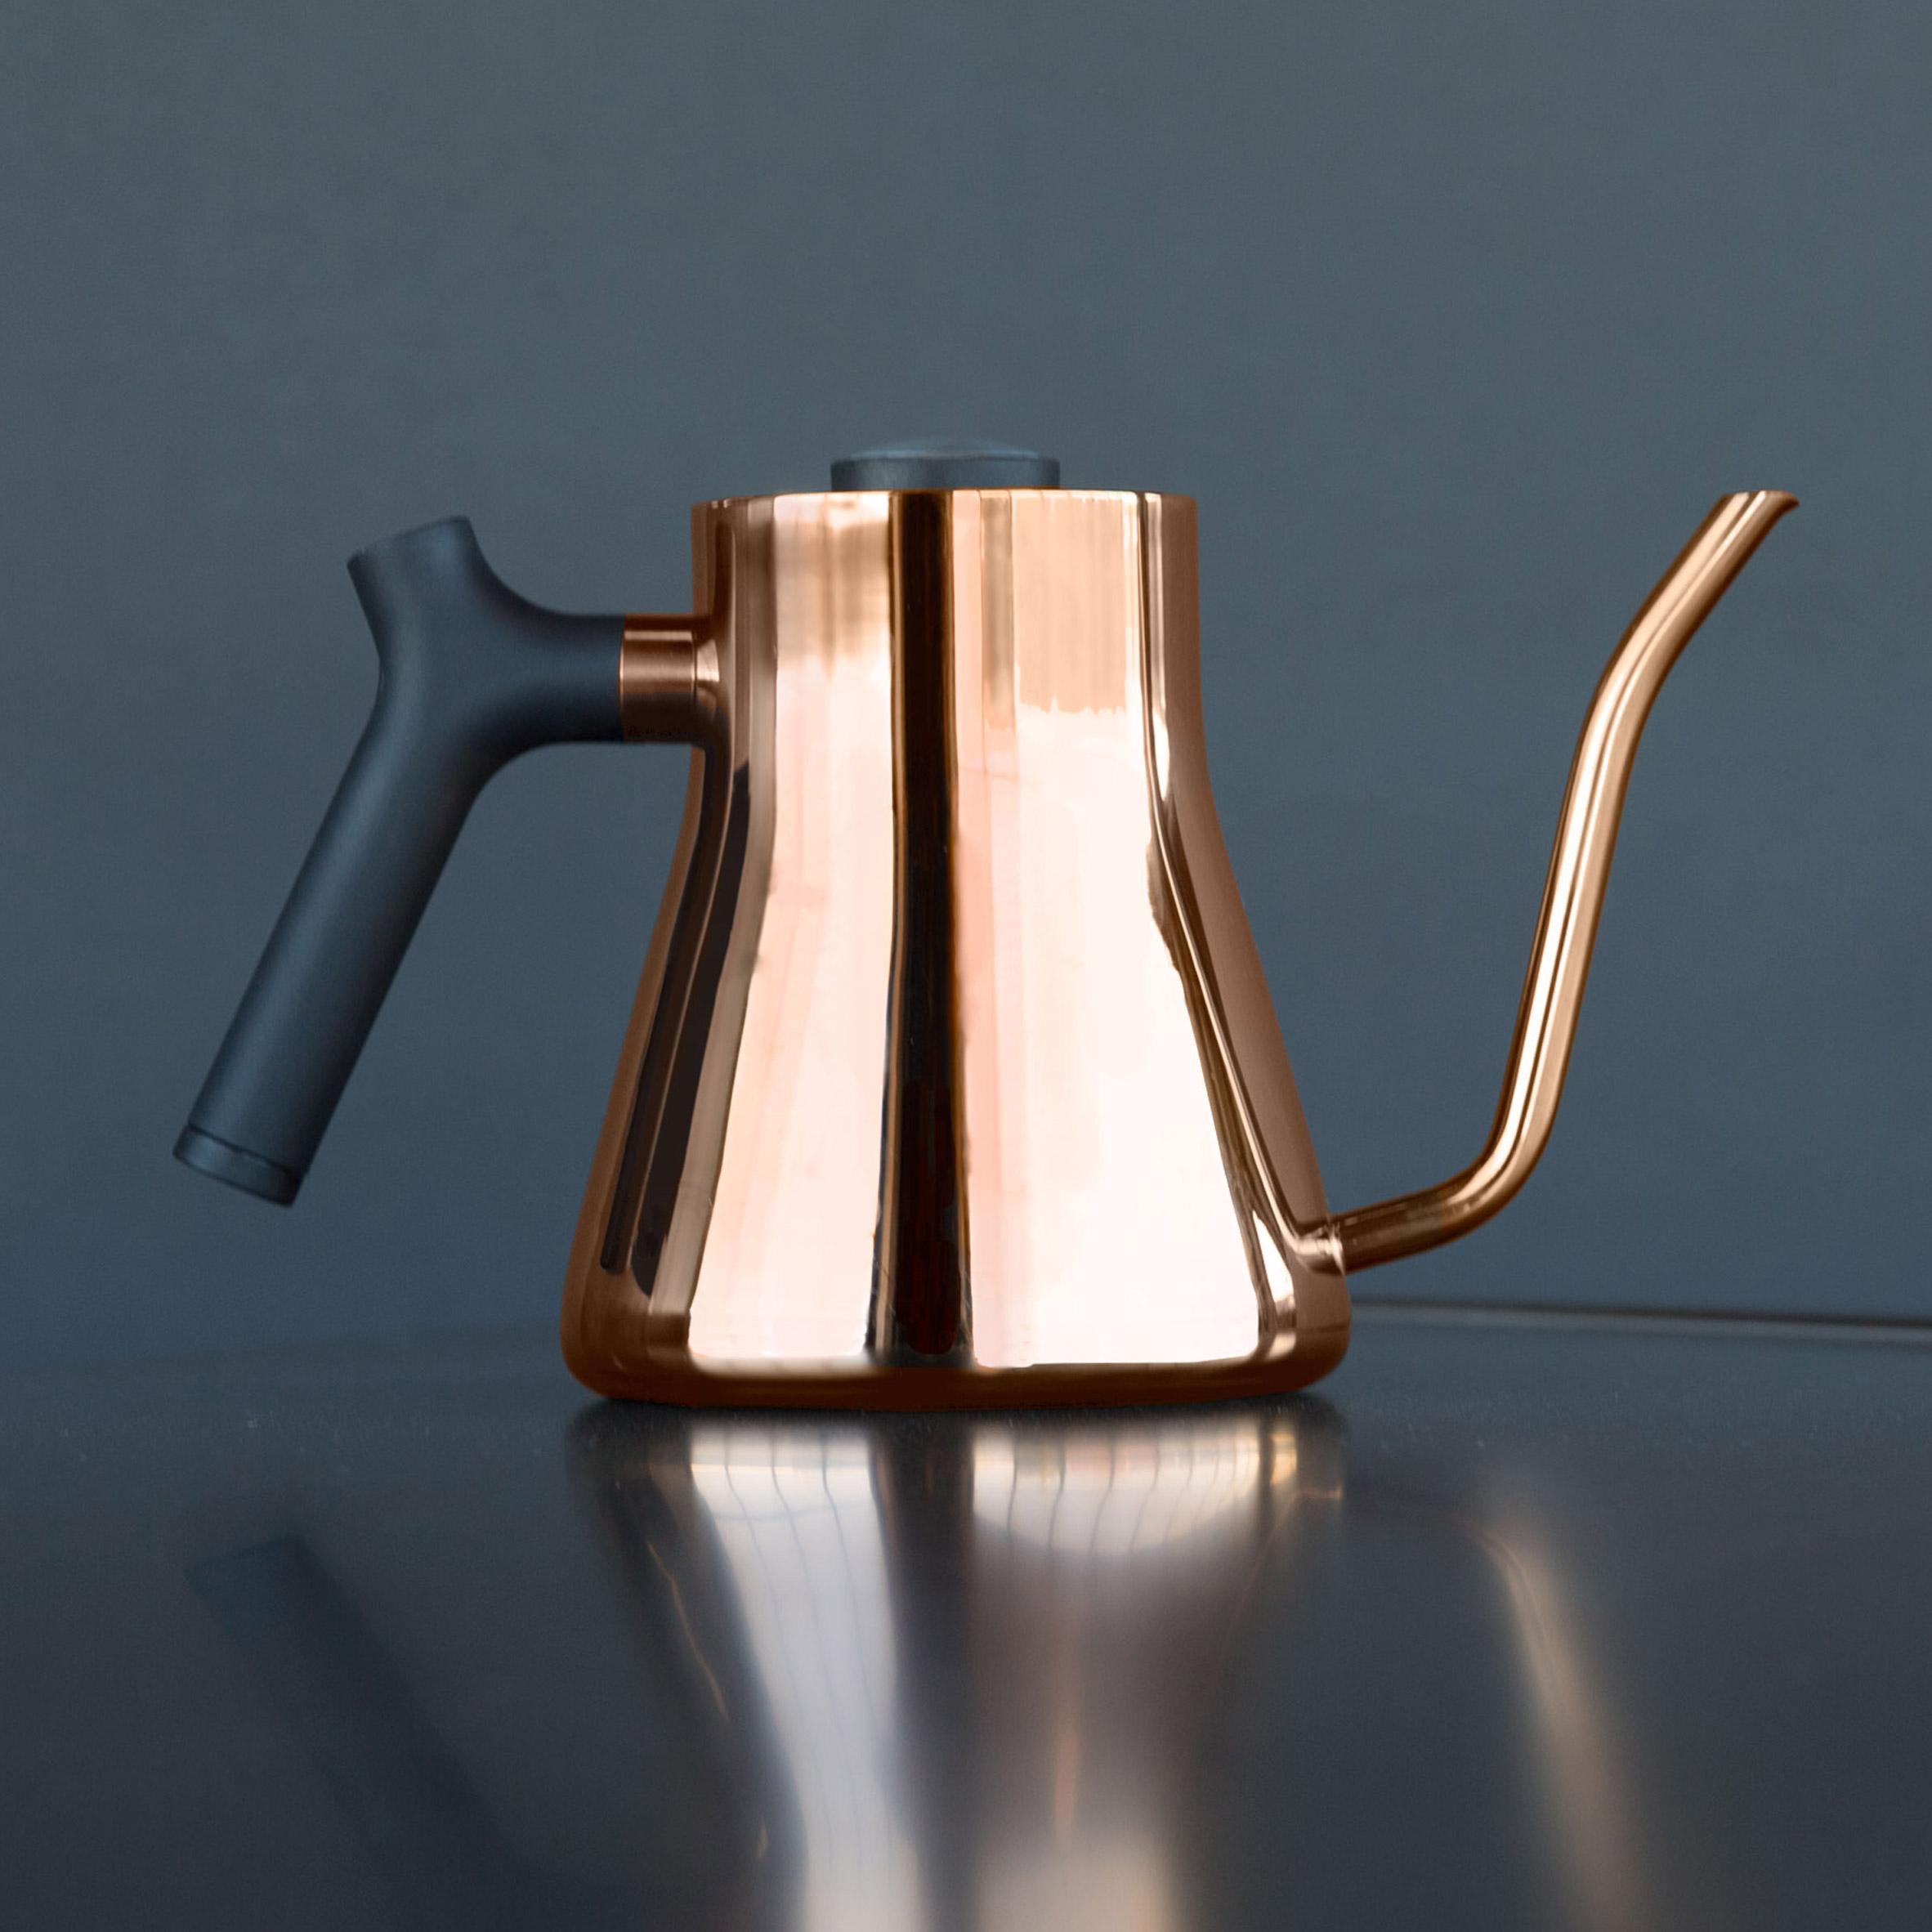 Fellow's Stagg EKG Kettle is About to Get a Big Upgrade (Two